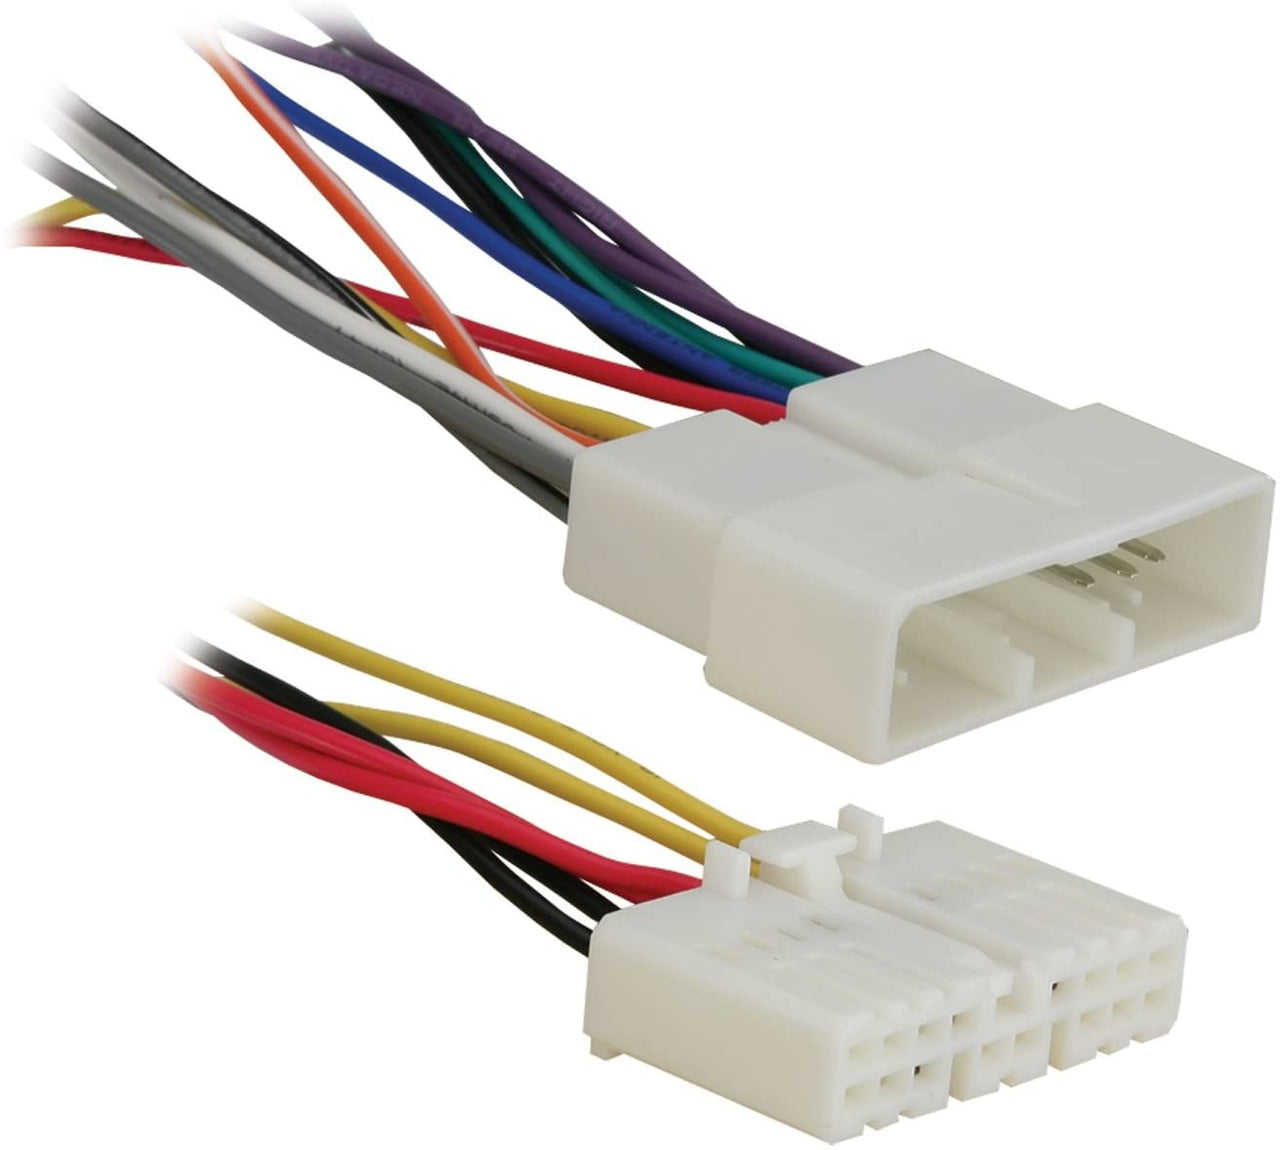 Metra 70-1720T<br/> Wiring Harness for 1996-1998 Honda Civic Vehicles with Keyless Entry Retainment